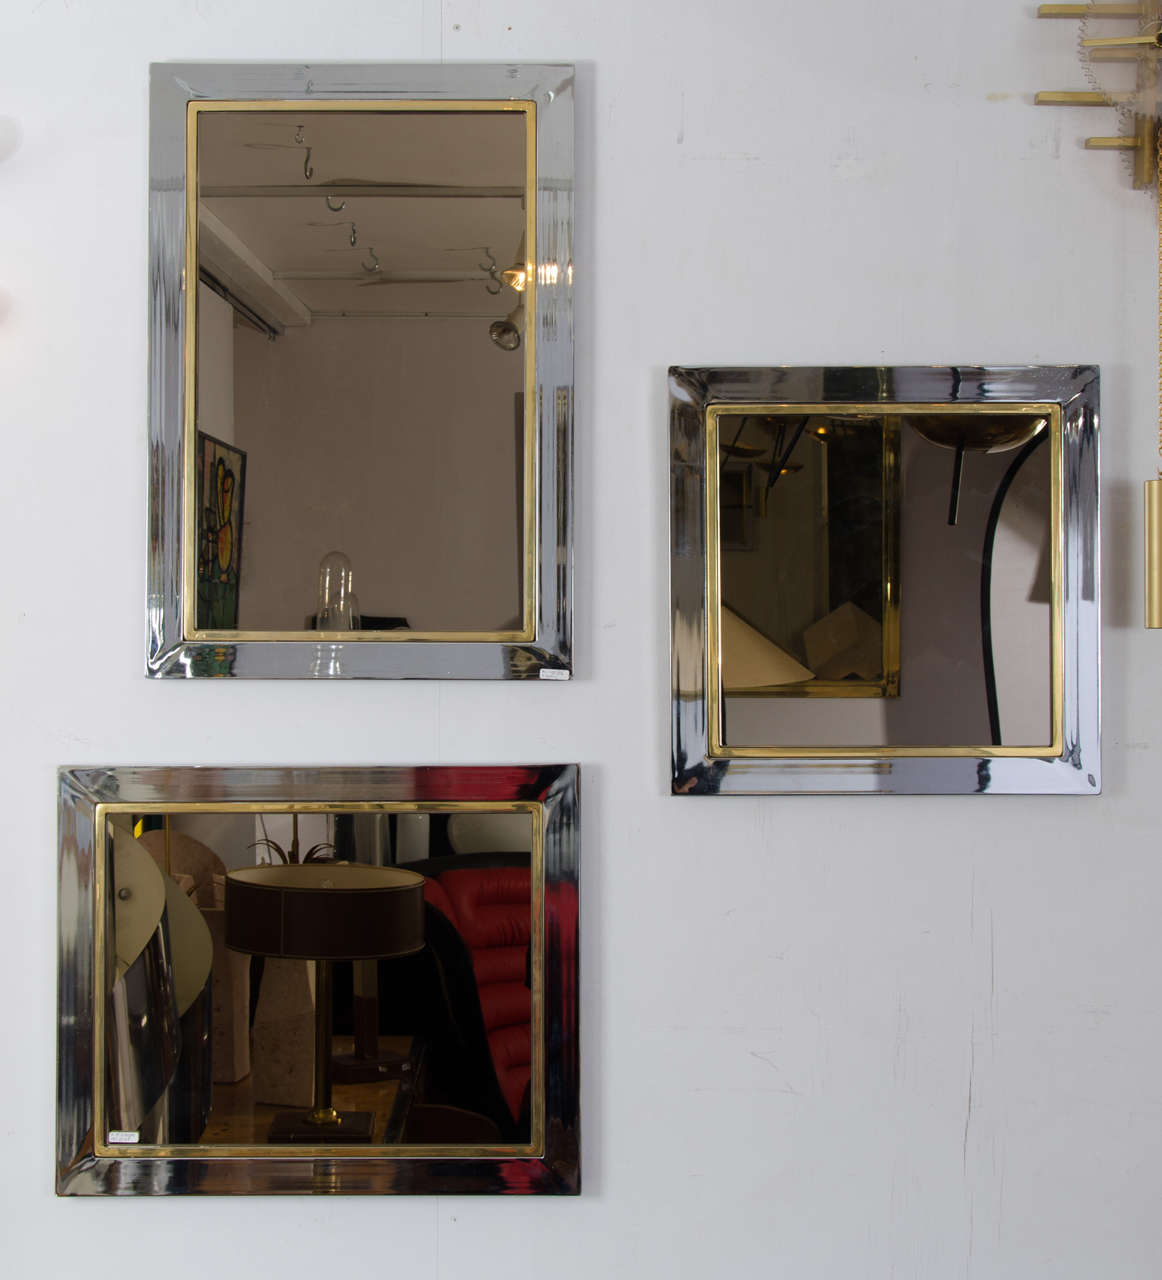 Chrome and brass edged mirrors with titanium colored glass.
All three come in the following three sizes.
Measurements: 45 X 64 cm.
55 X 64 cm.
45 X 45 cm.